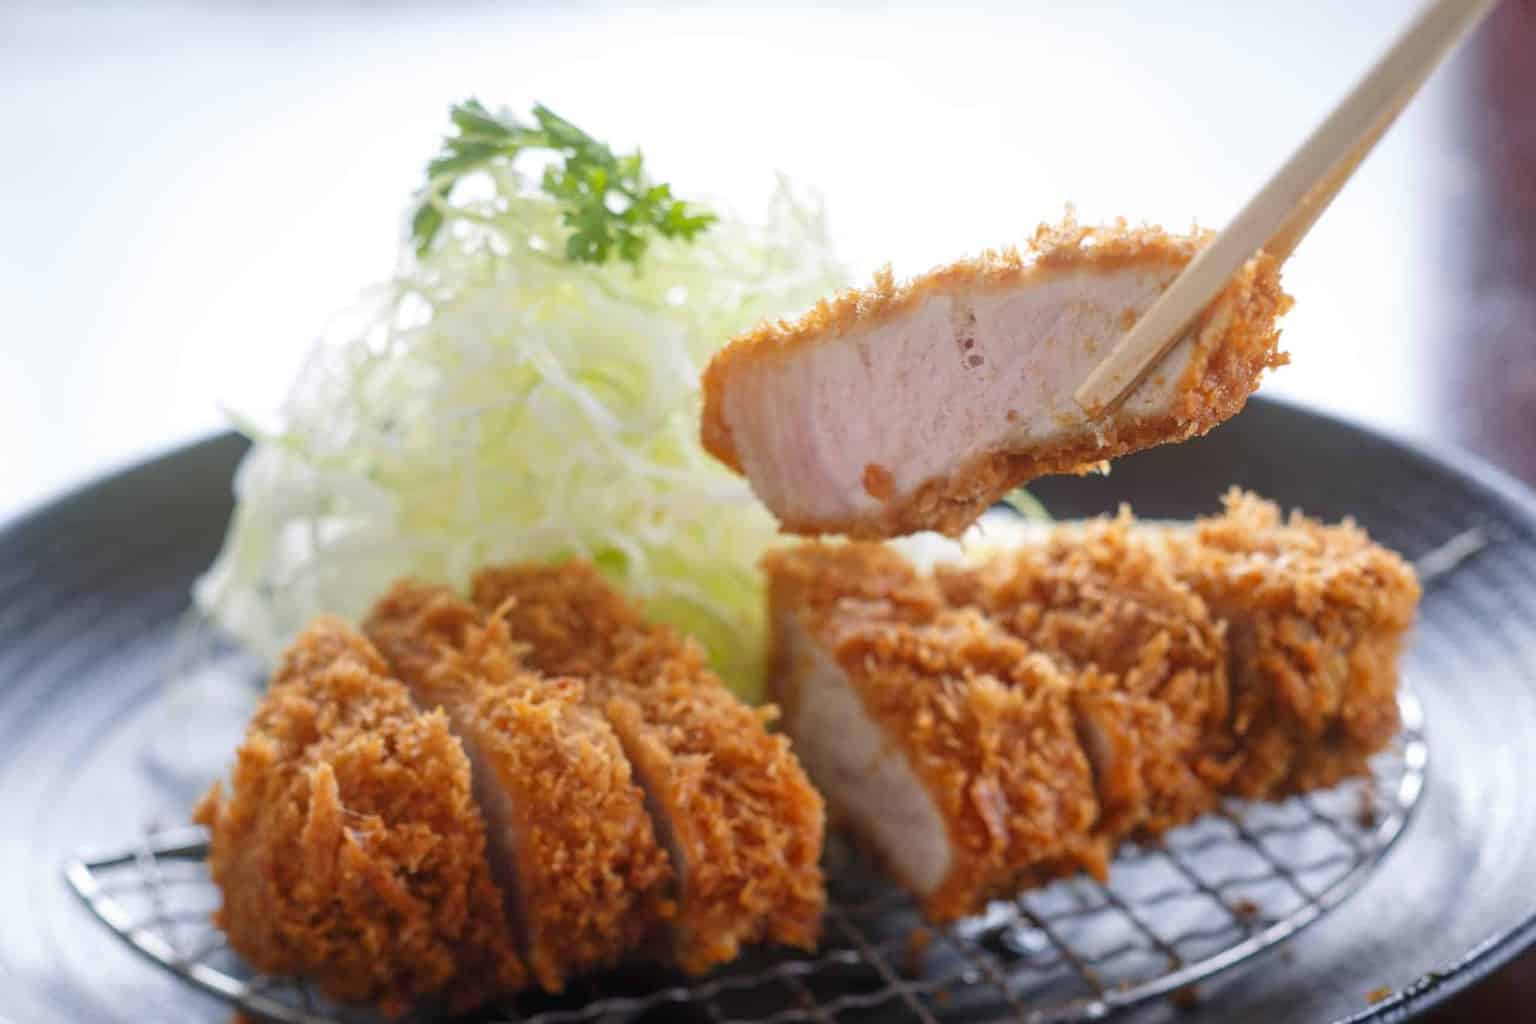 Starting with our famous tonkatsu, at Ginza Bairin we strive to offer our customers many convenient options. From online reservations, take out orders, and the large variety of high quality dishes on offer, you'll find a meal you like, the way you want it at Ginza Bairin.